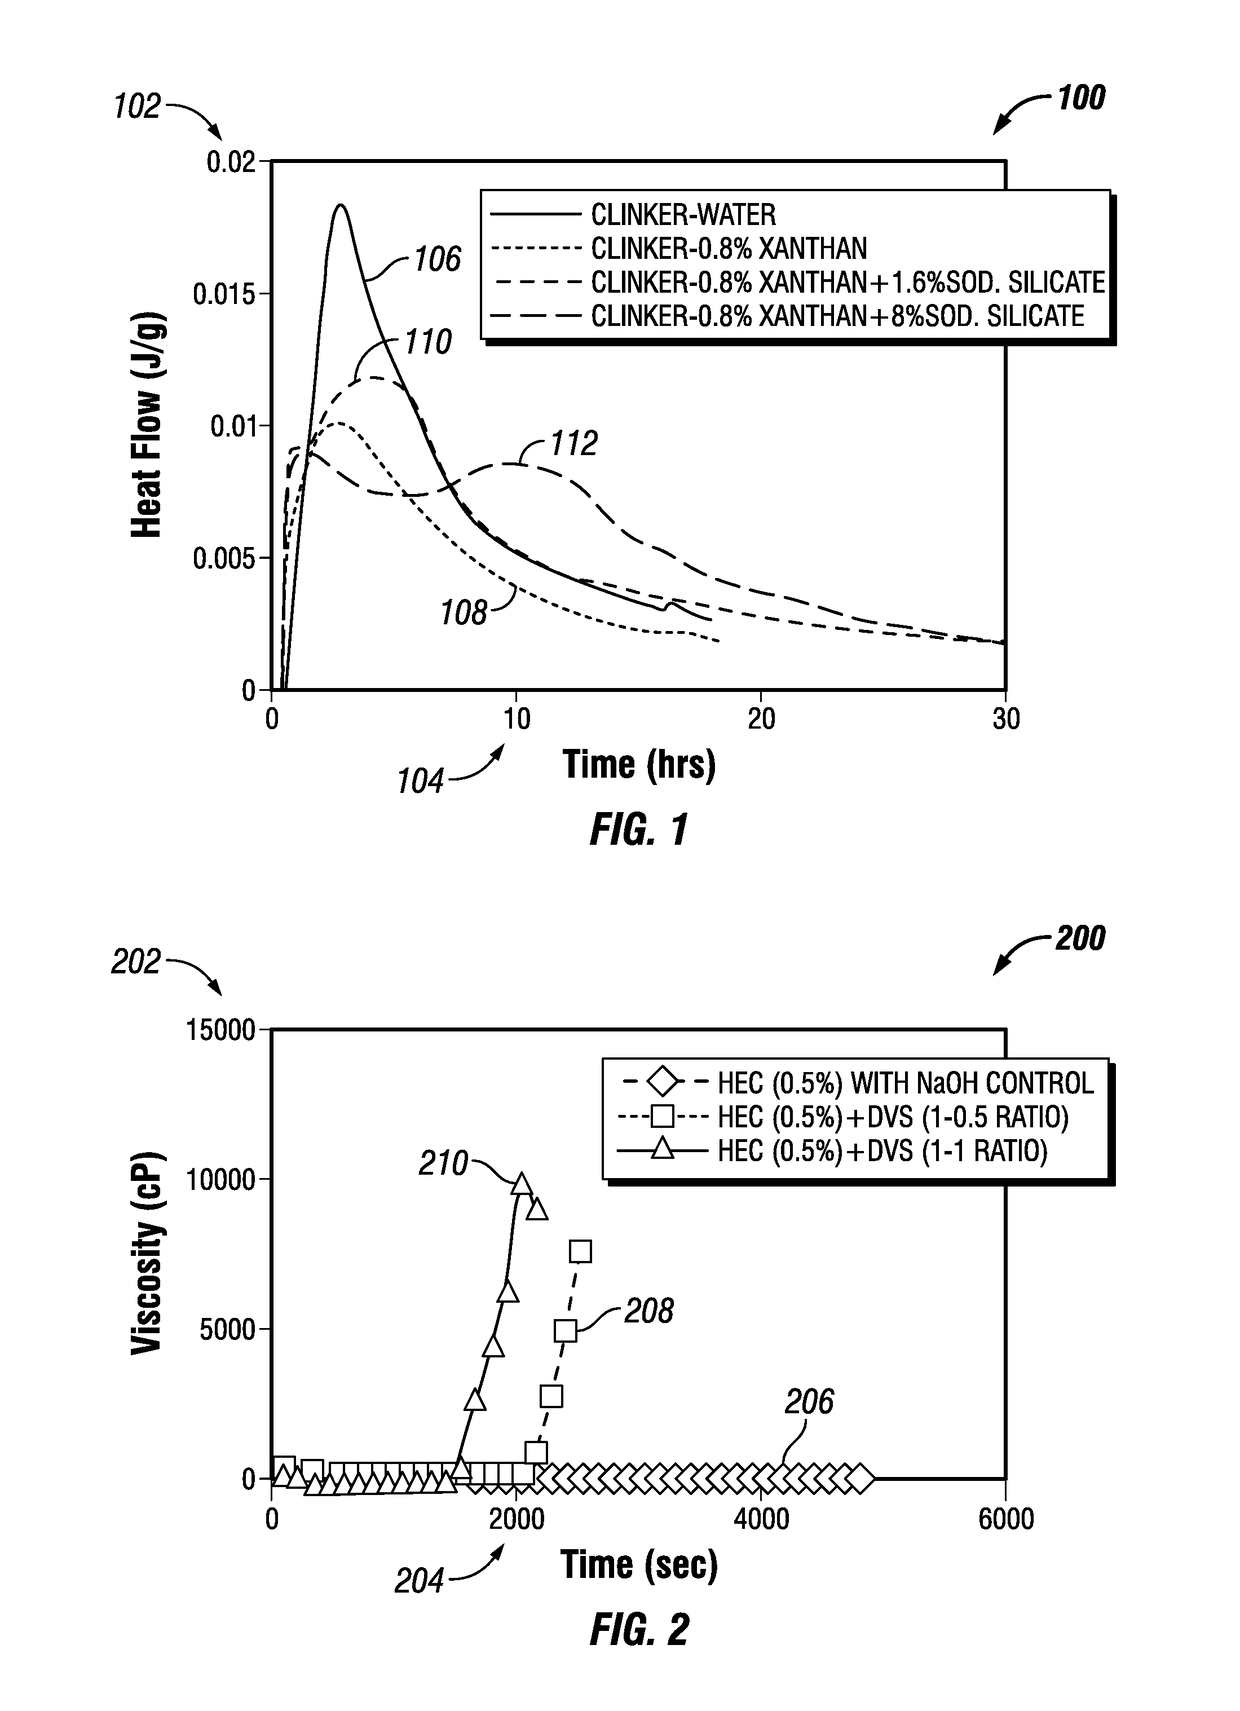 Loss circulation compositions (LCM) having portland cement clinker